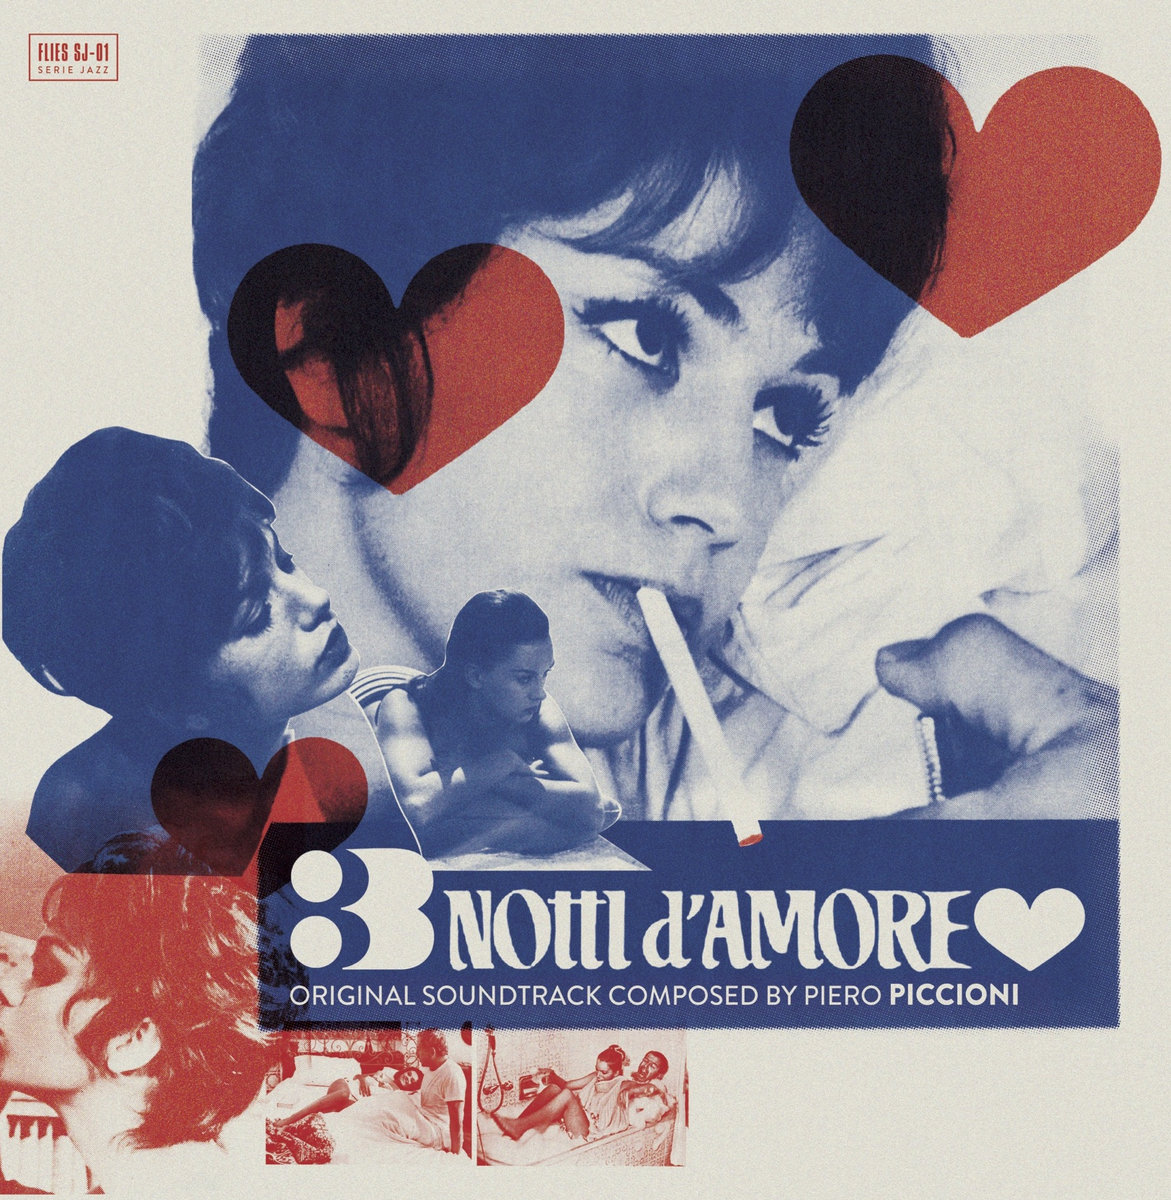 Tre notti d'amore (3 Nights of Love)